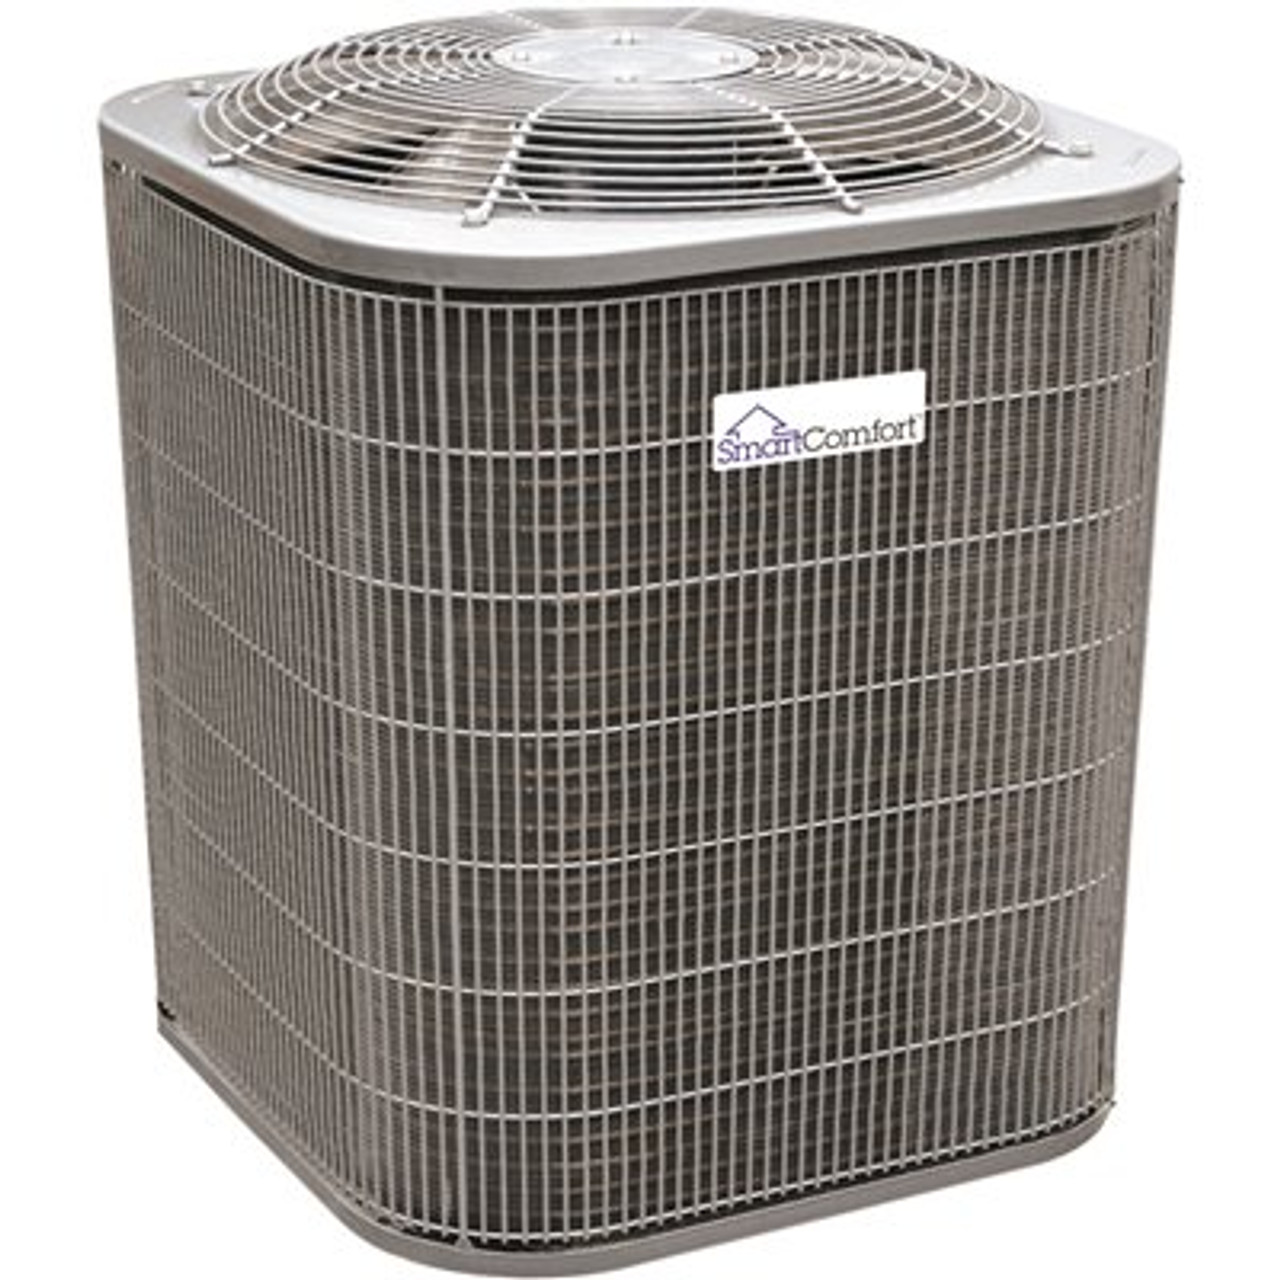 SMARTCOMFORT BY CARRIER 2 Ton 15 SEER Ac Condenser For Se And Sw Regions